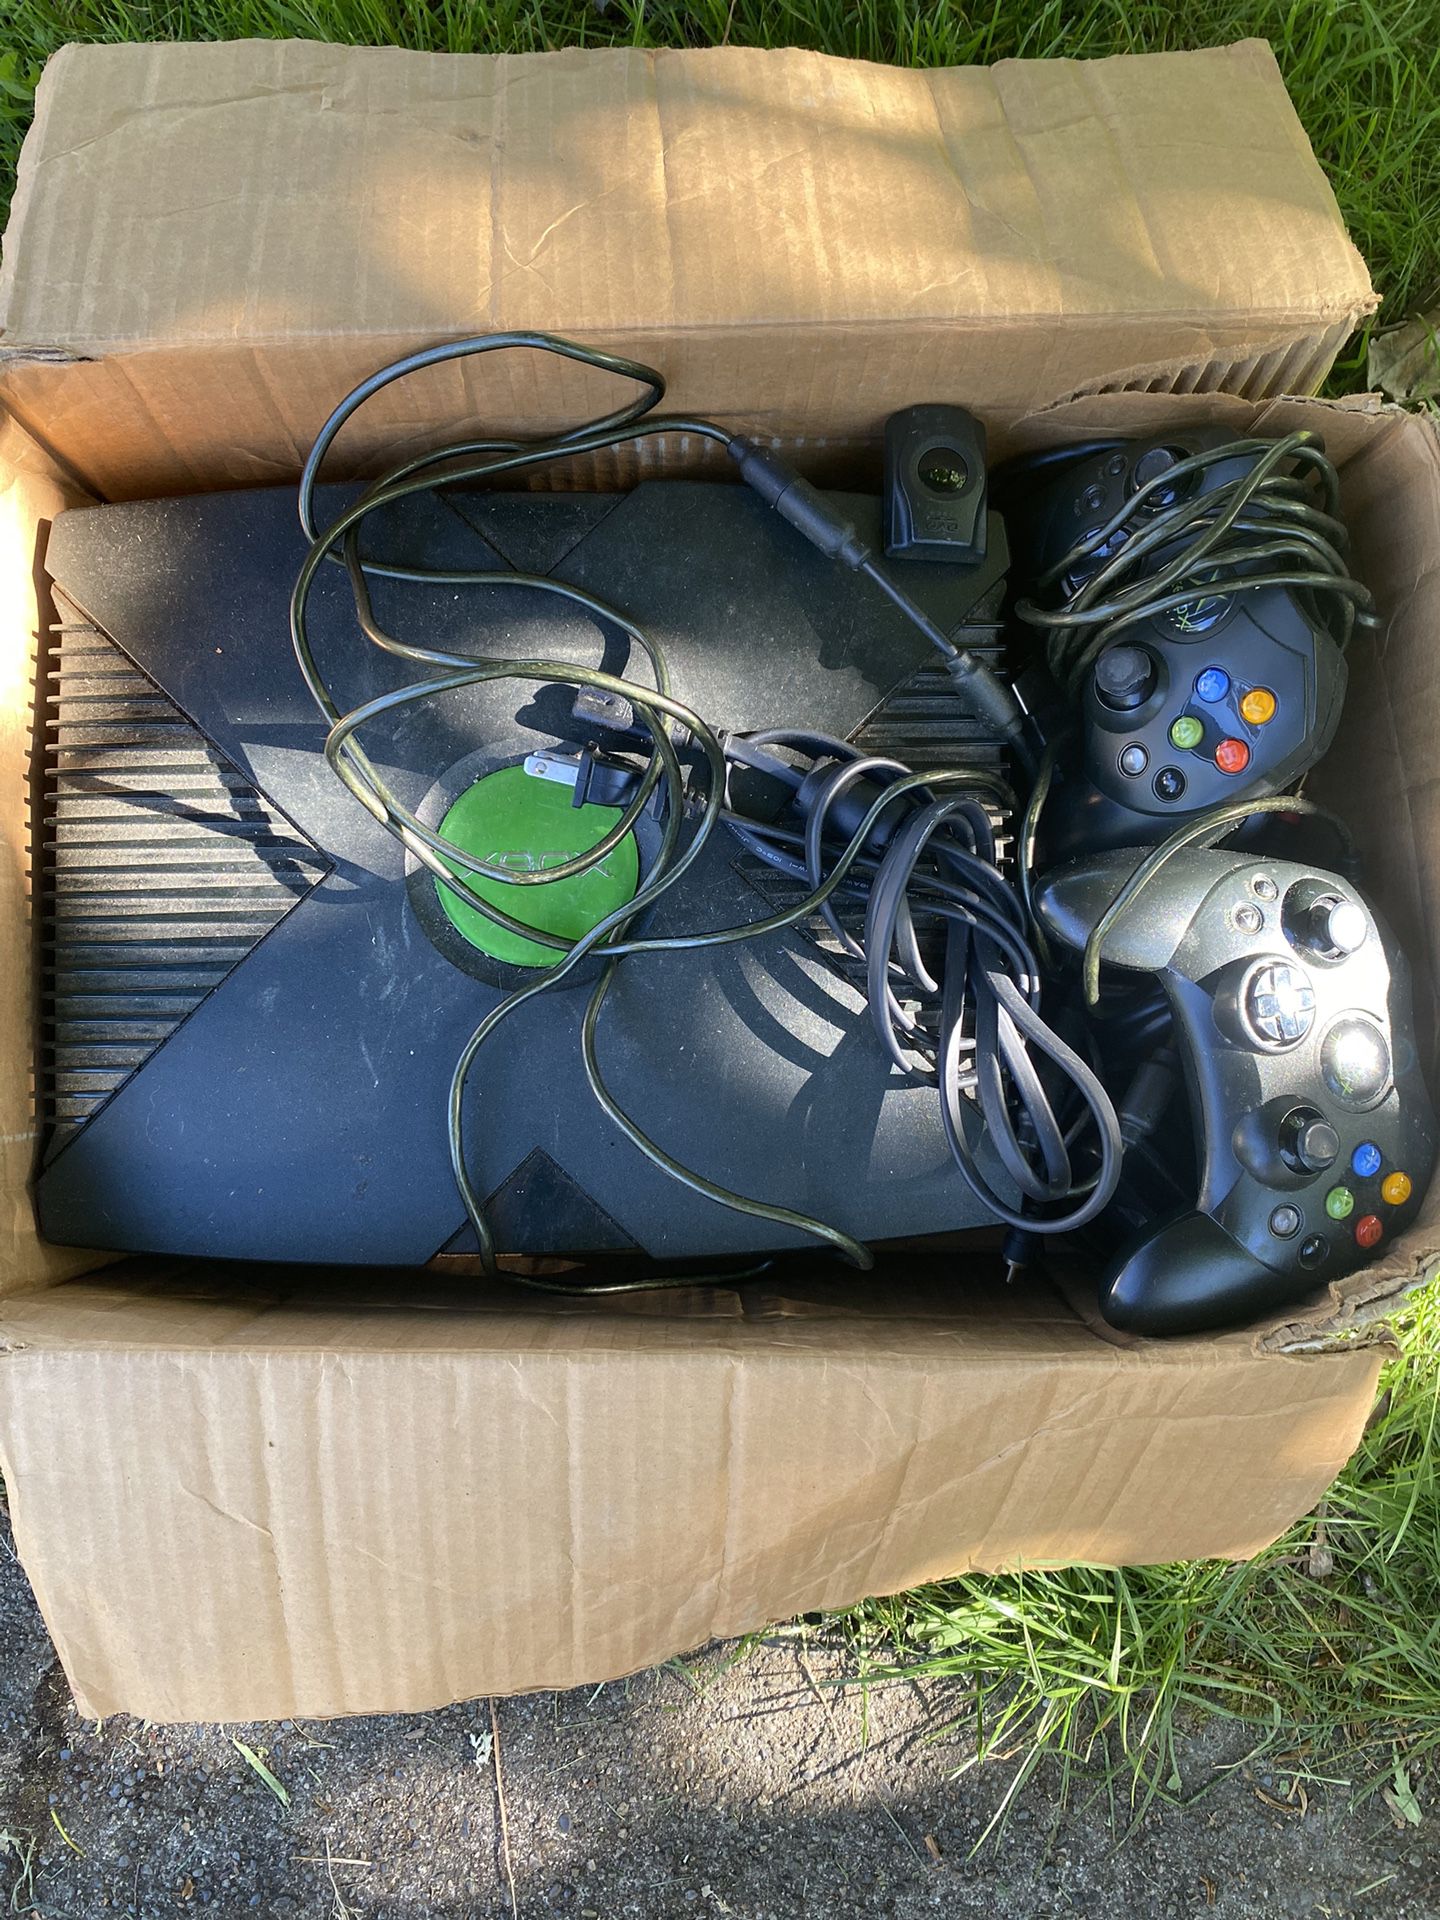 Original Xbox With 3 Controllers